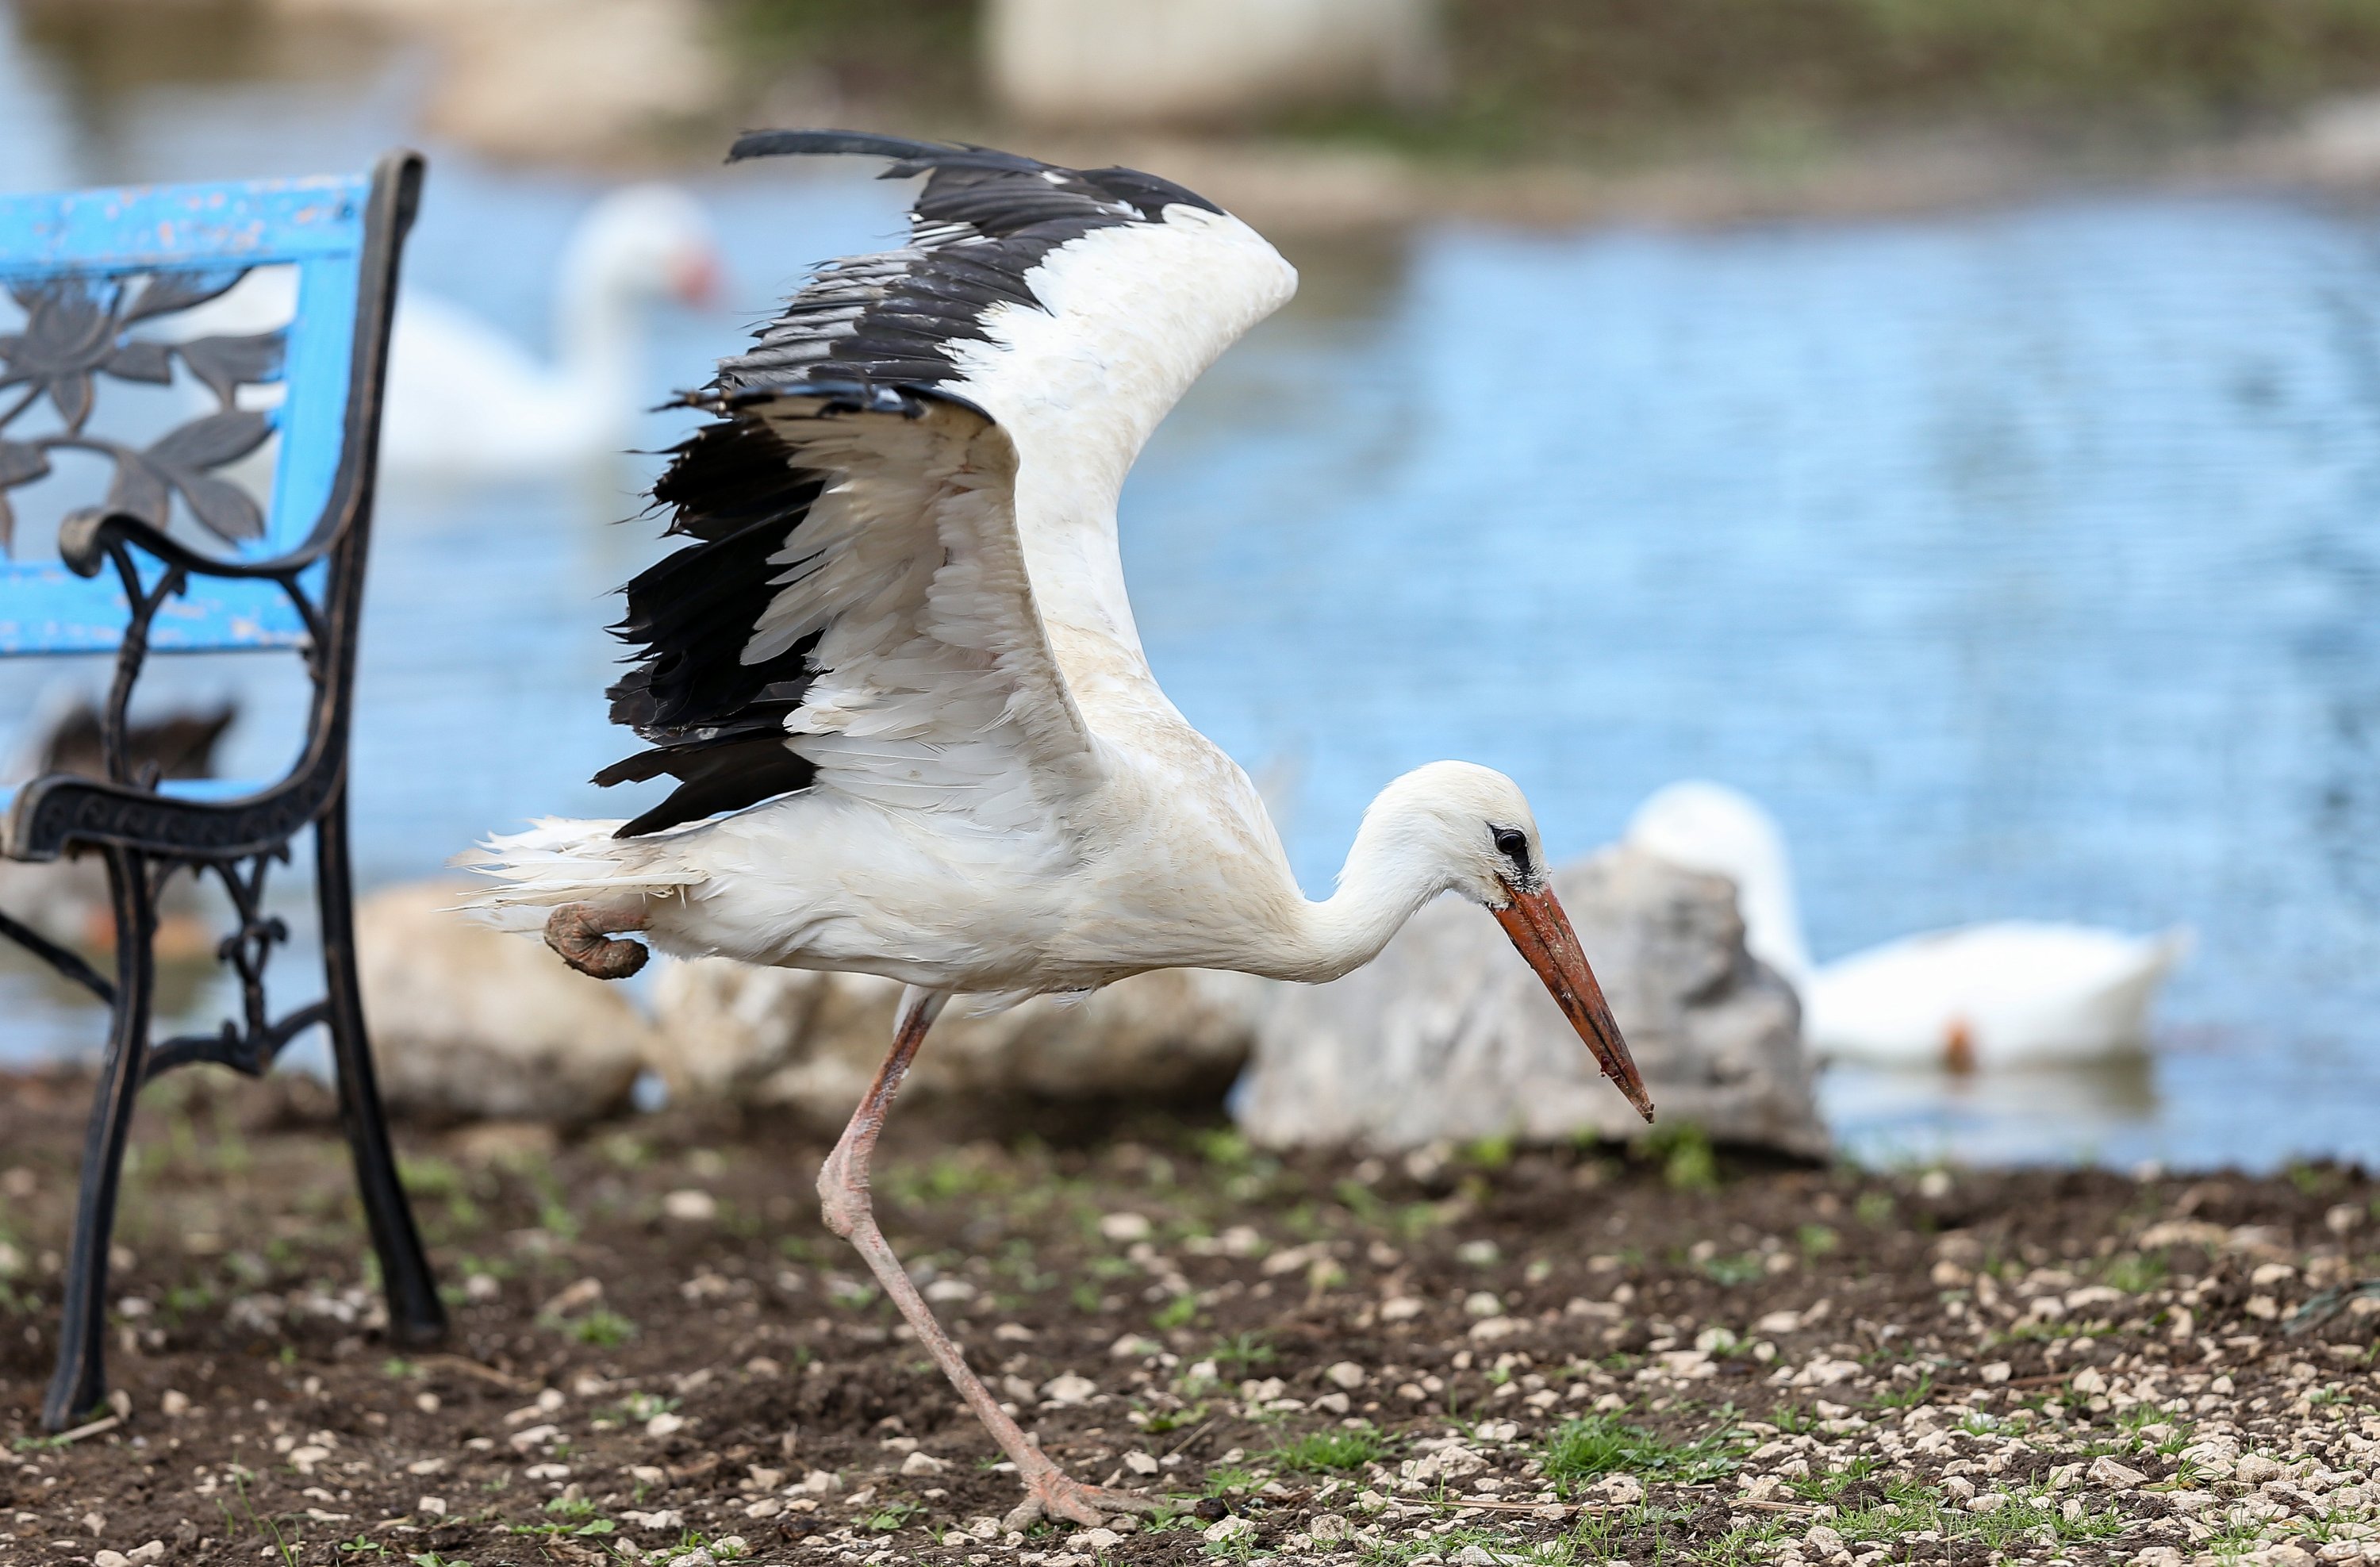 Injured storks cared for at Turkey's 'Retired Animals Farm' | Daily Sabah